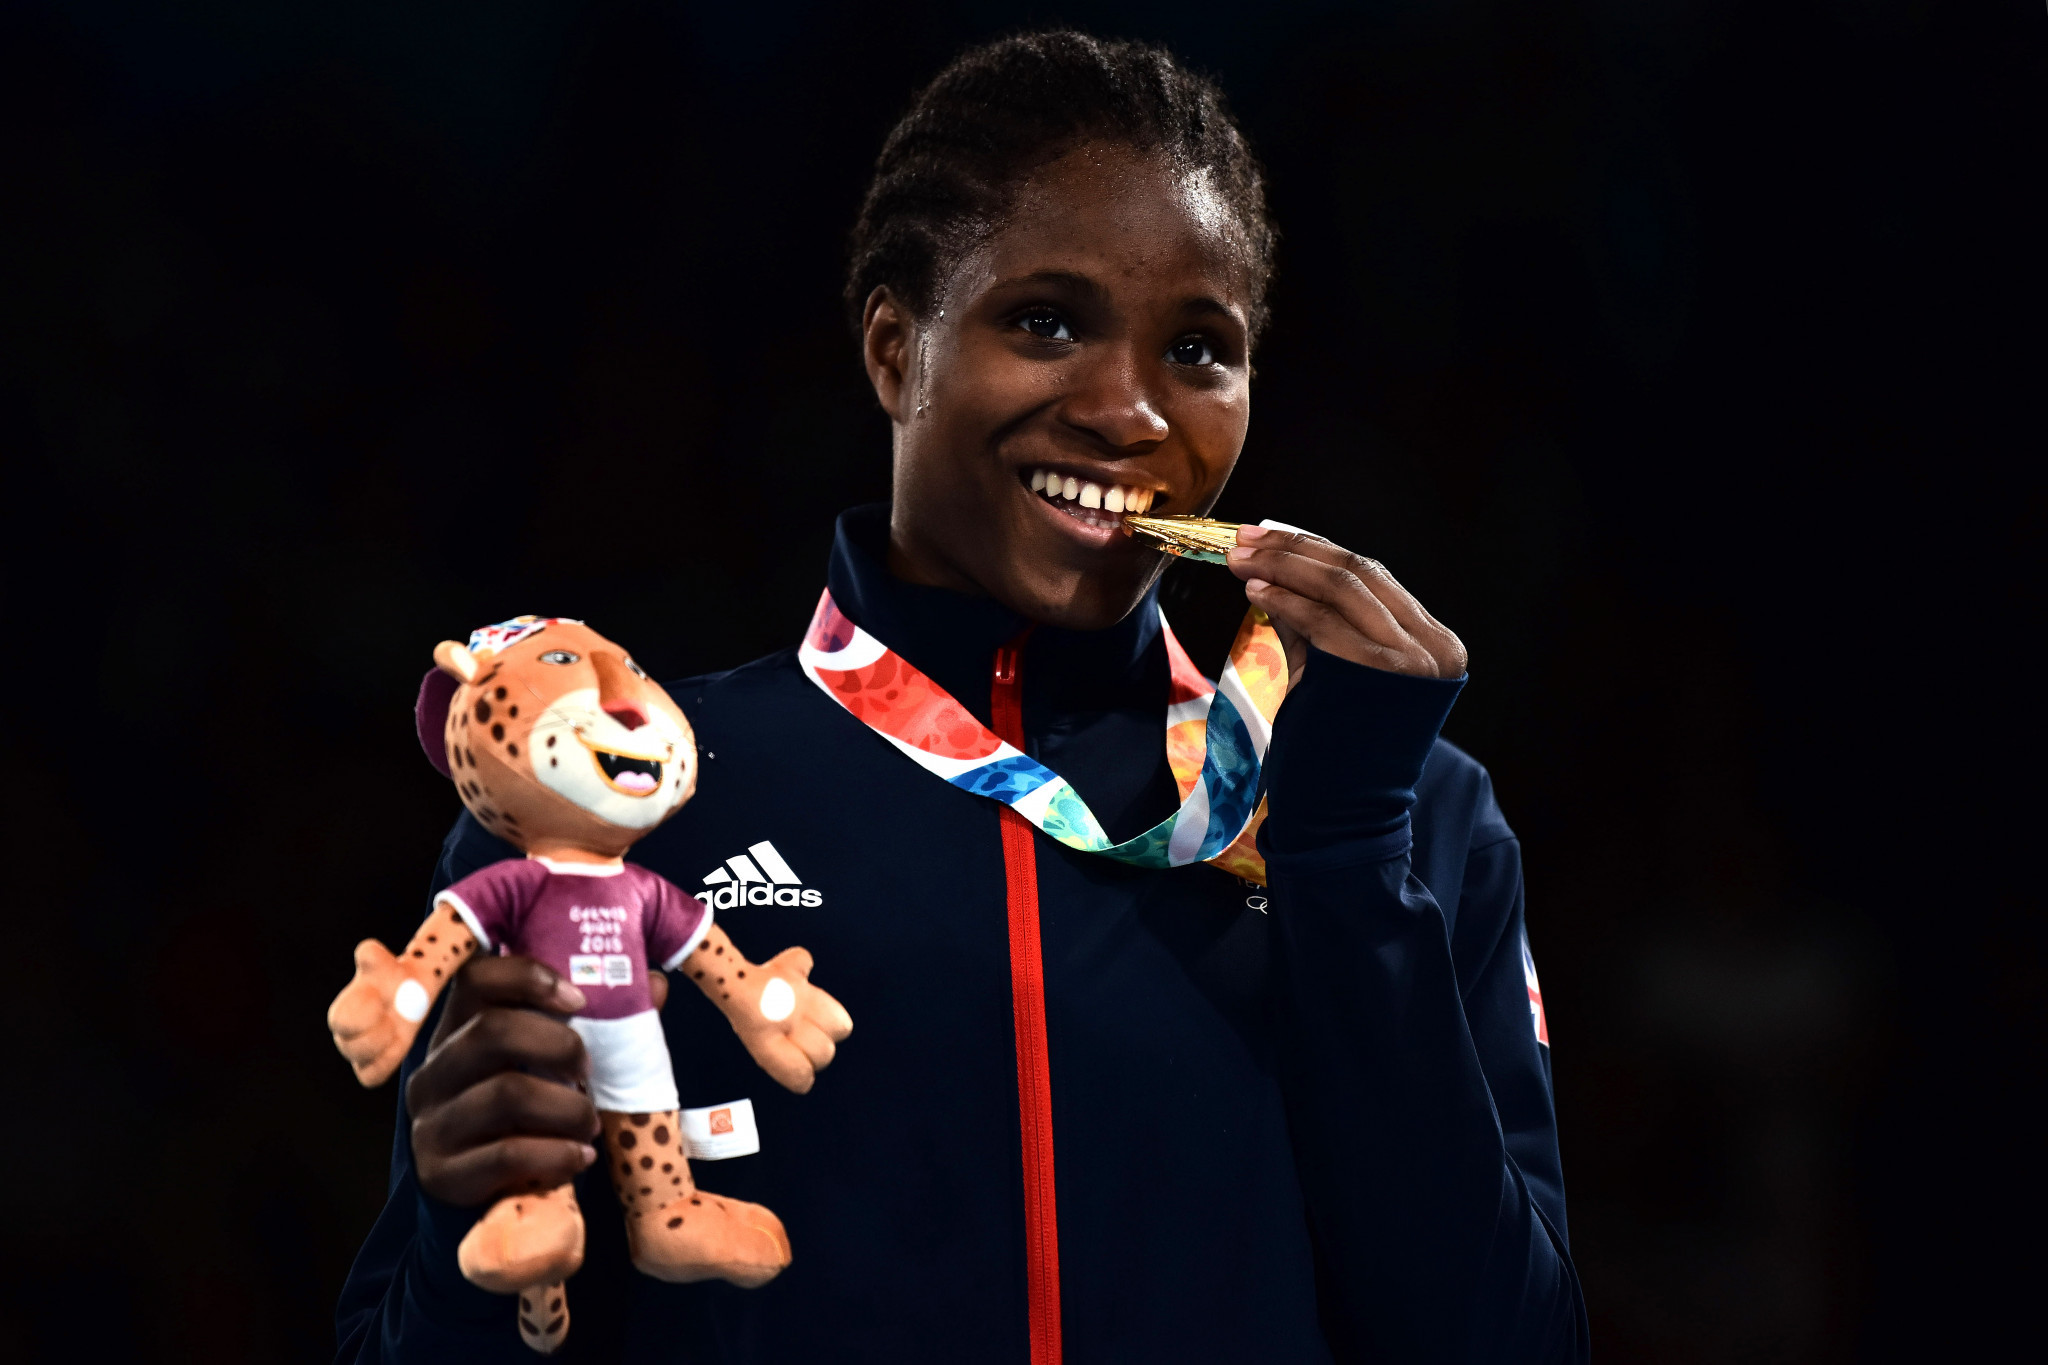 Caroline Dubois won Youth Olympic gold in Buenos Aires but the sport's place at the full Games is in doubt ©Getty Images